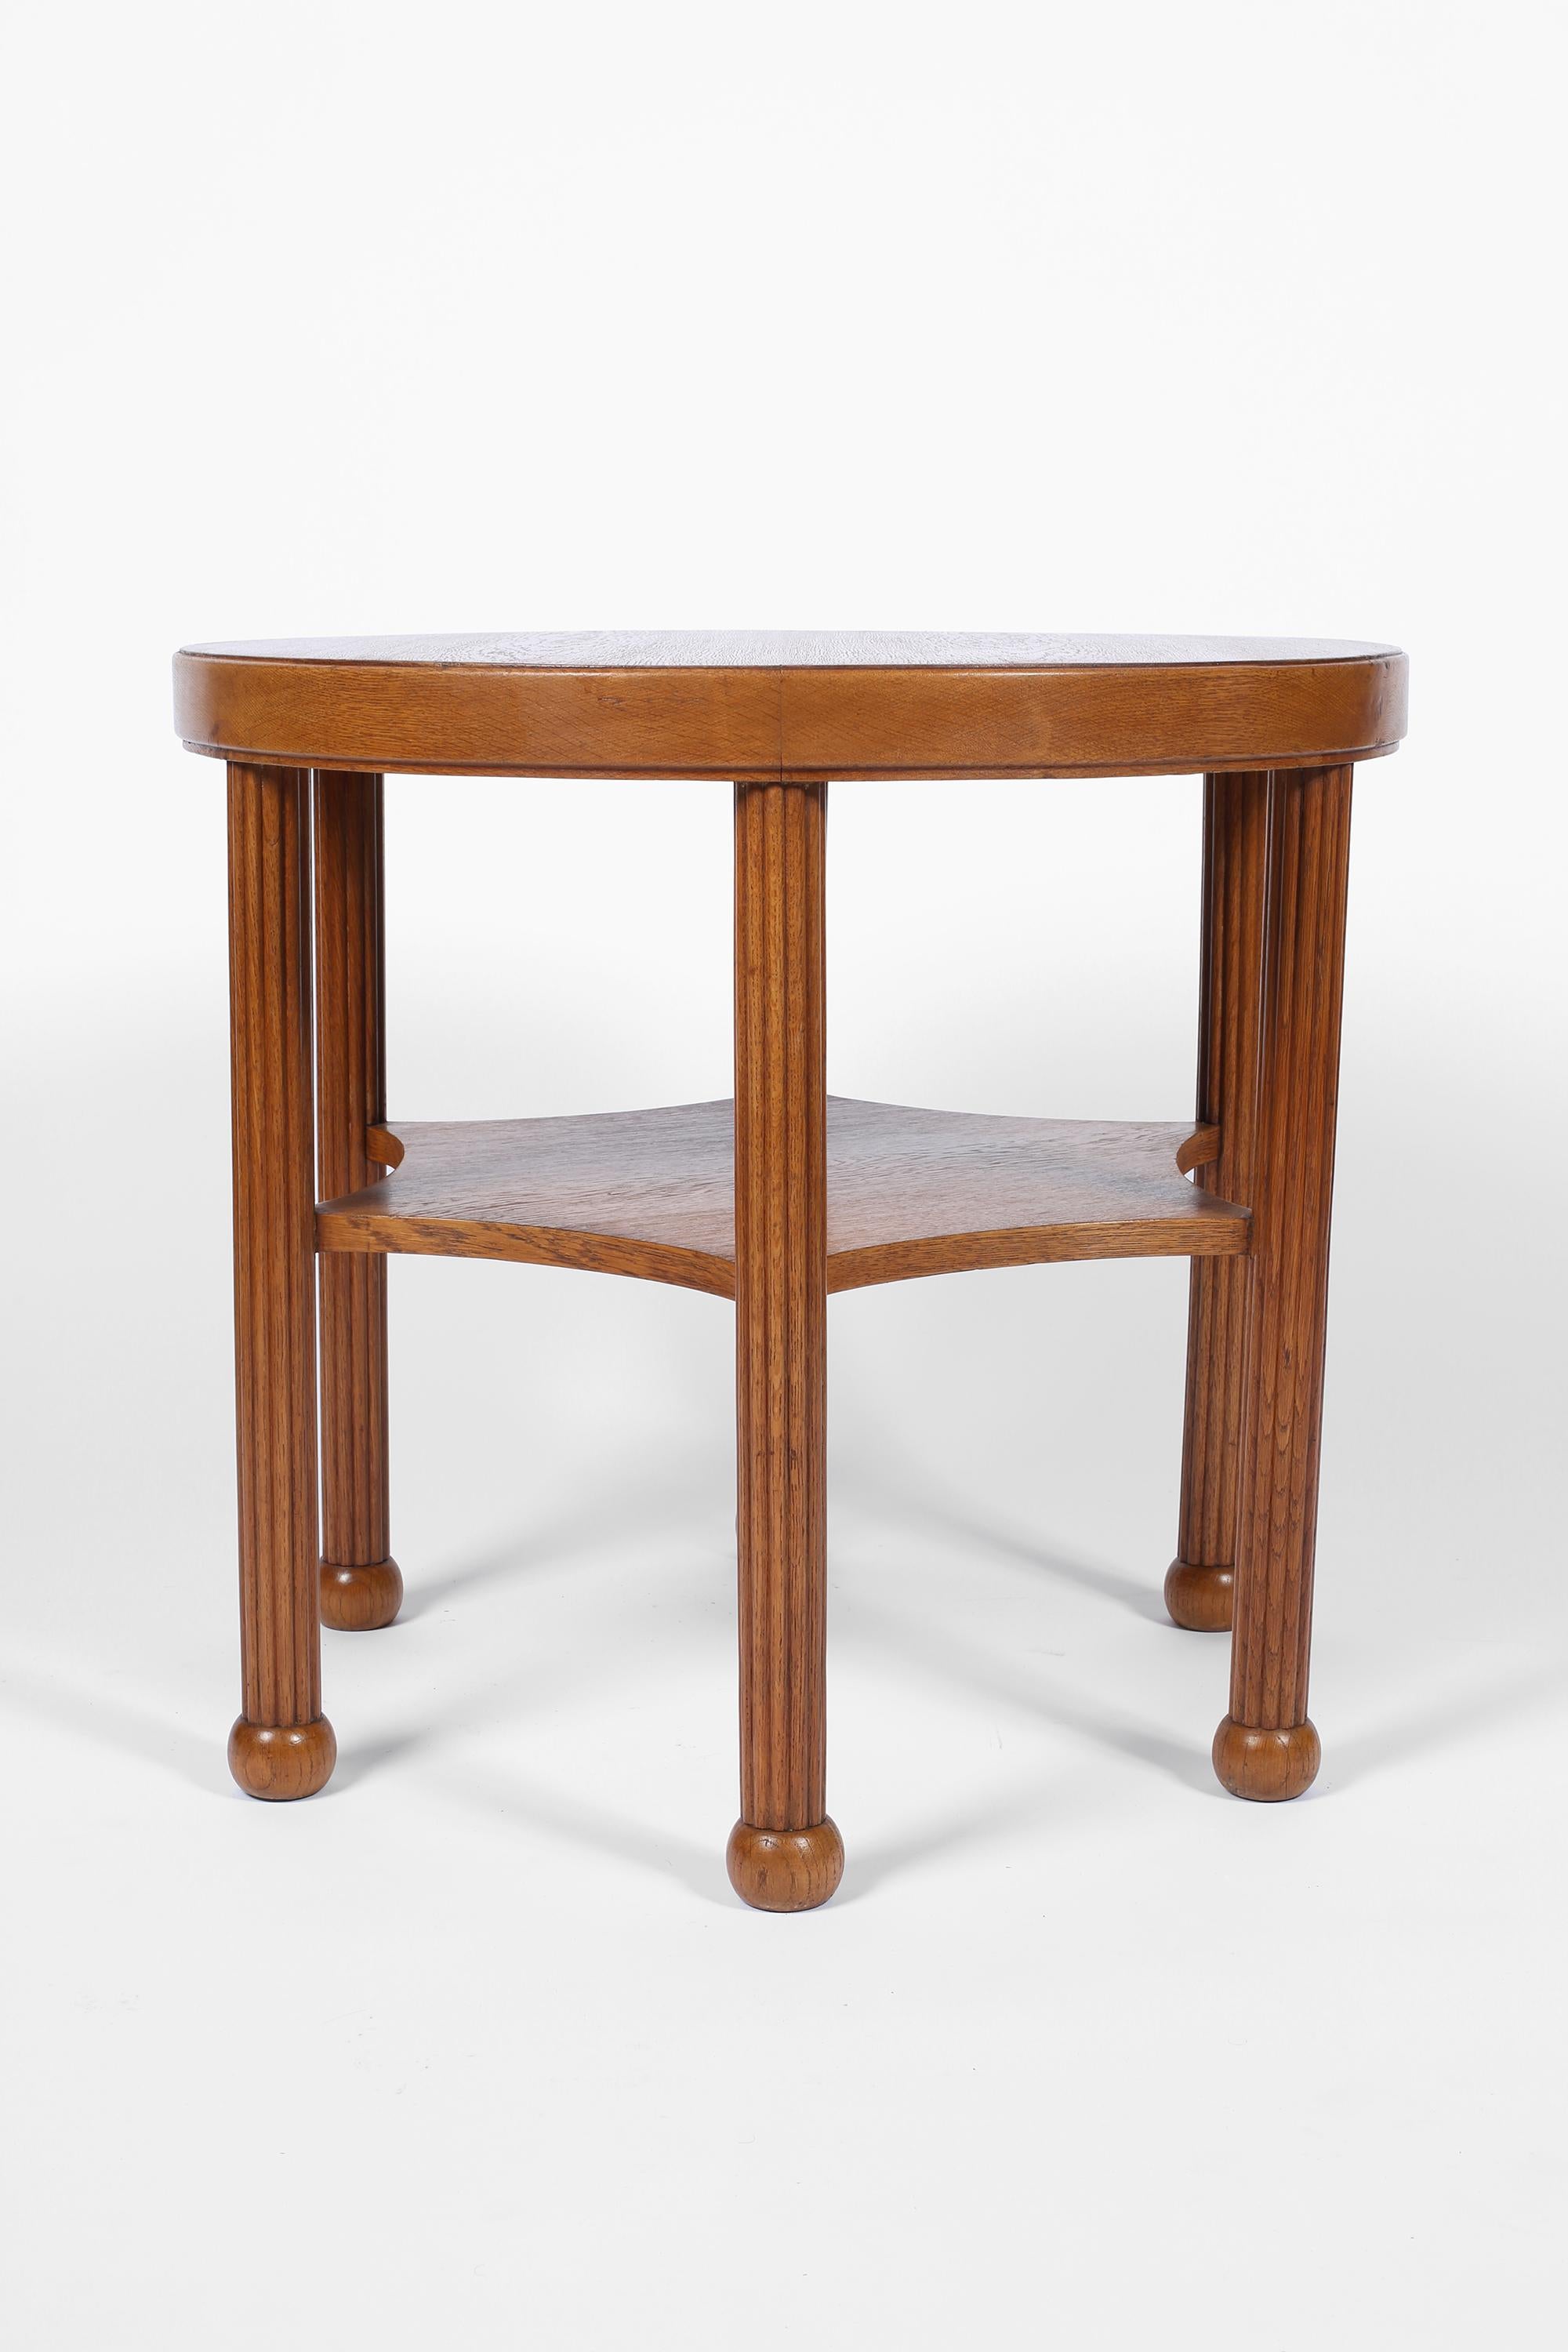 A fine early Art Deco occasional table in solid and veneered oak. The circular top sitting above a star shaped second tier, with six reeded legs terminating in carved boule feet. French, circa 1920s.